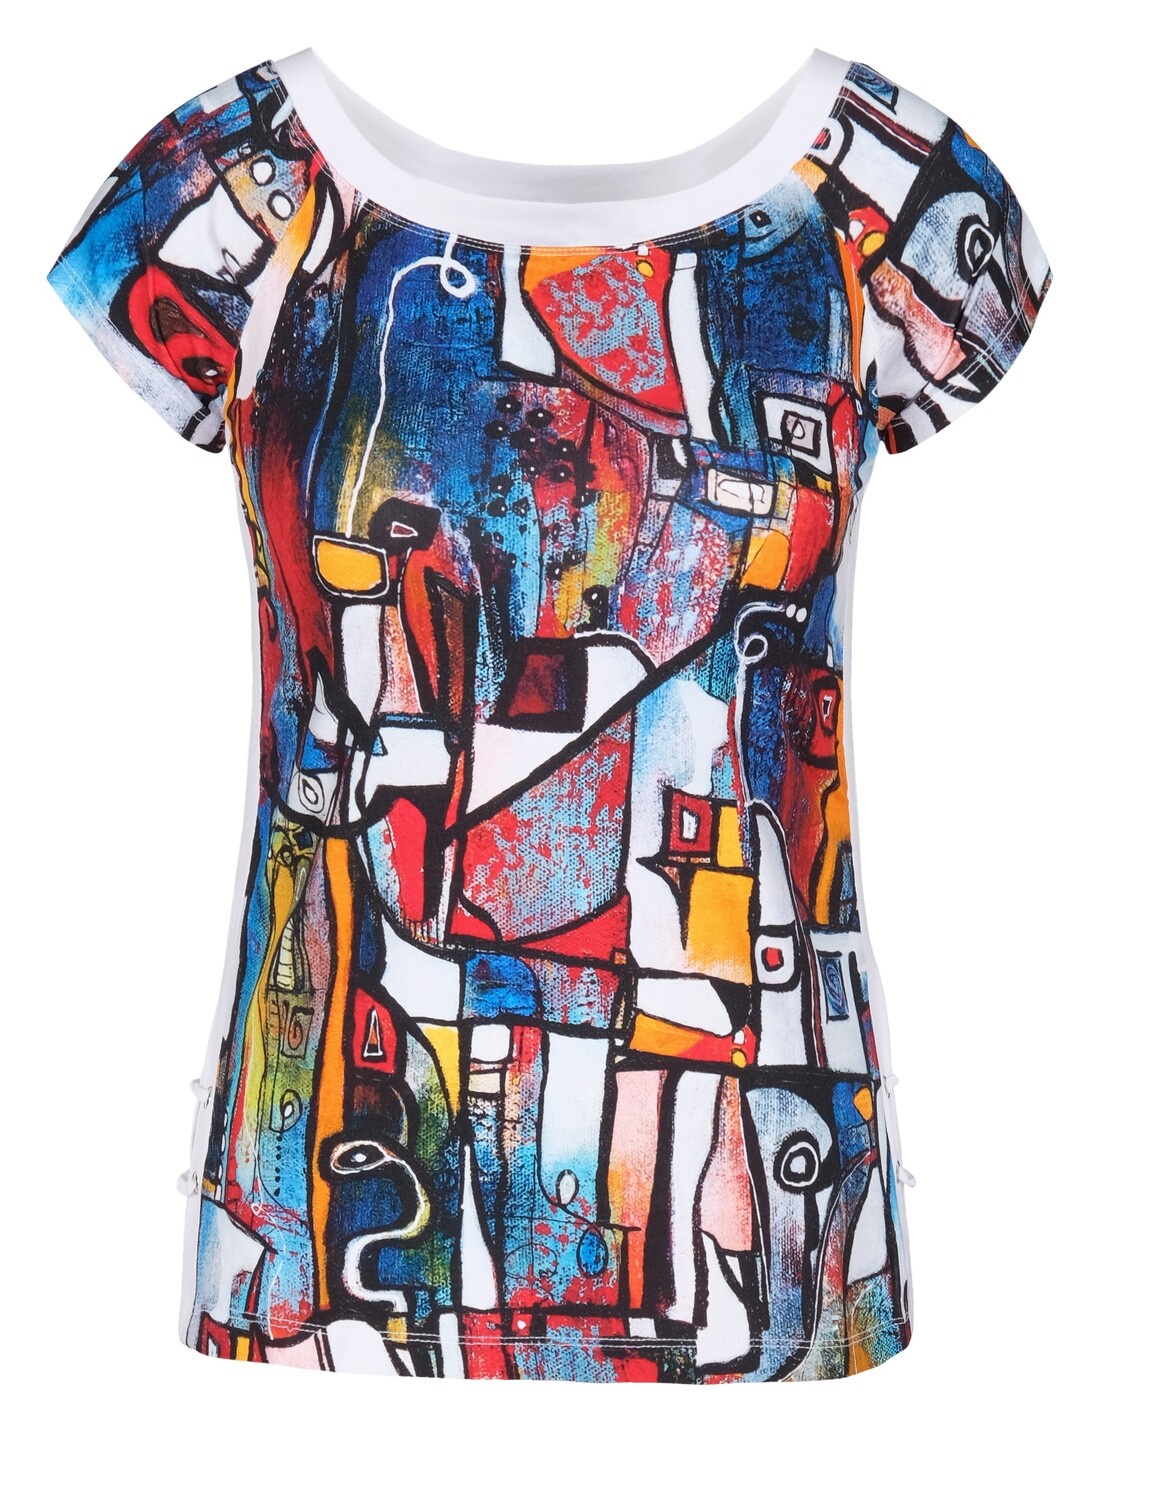 Simply Art Dolcezza: It's Complicated Crazy Cool Abstract Art Portrait Neck Top SOLD OUT